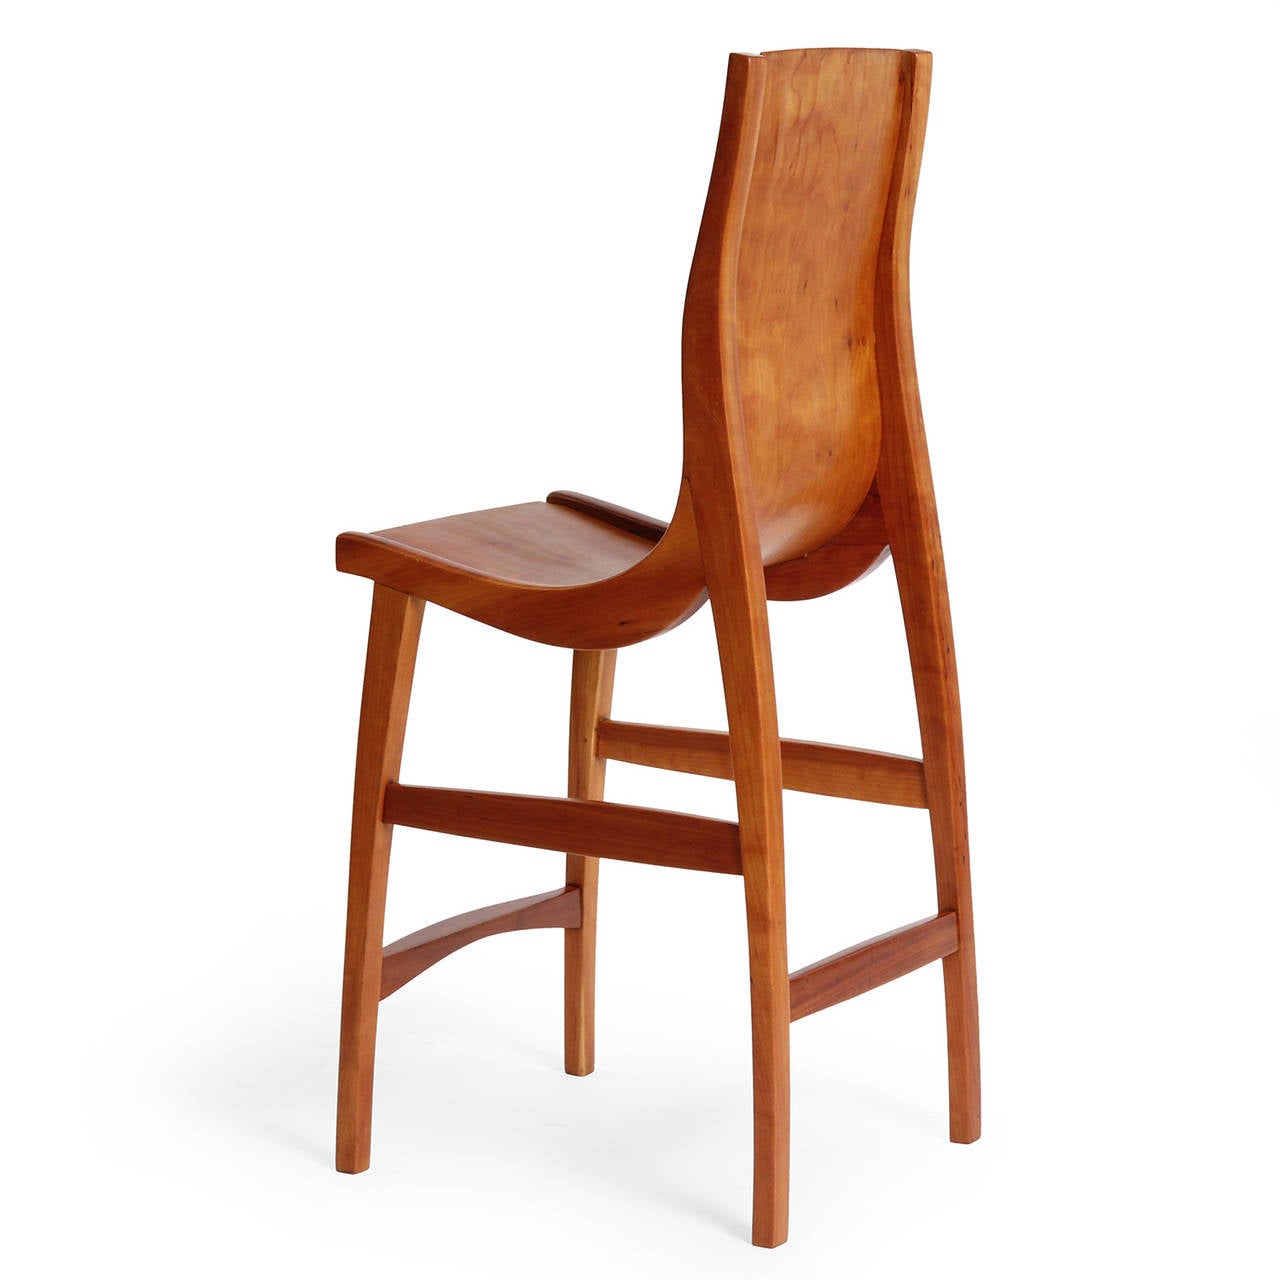 American Craftsman Pair of Sculptural High Chairs by Jere Osgood